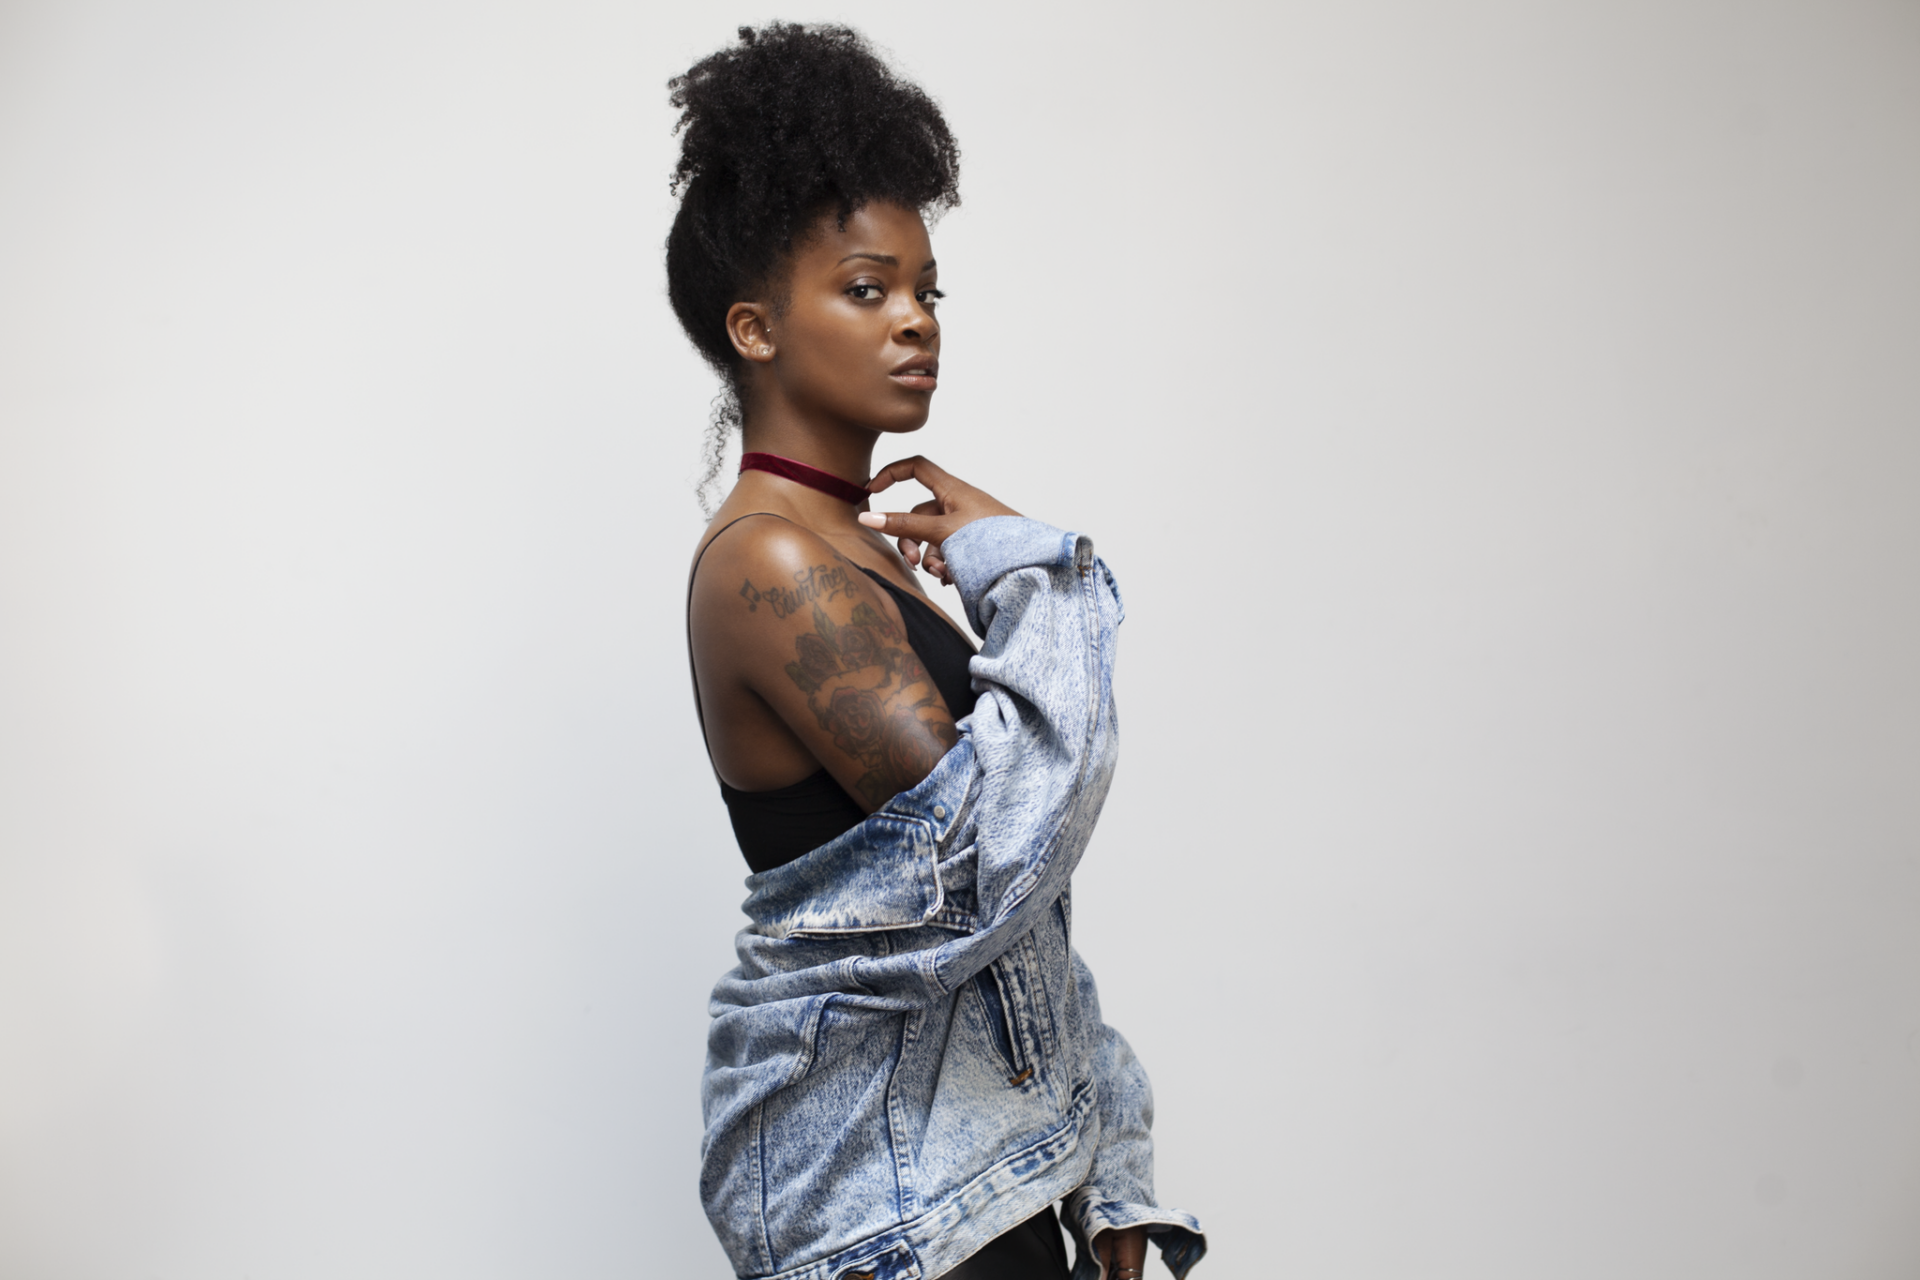 Ari Lennox discusses touring with J. Cole and her vintage-soul pop music